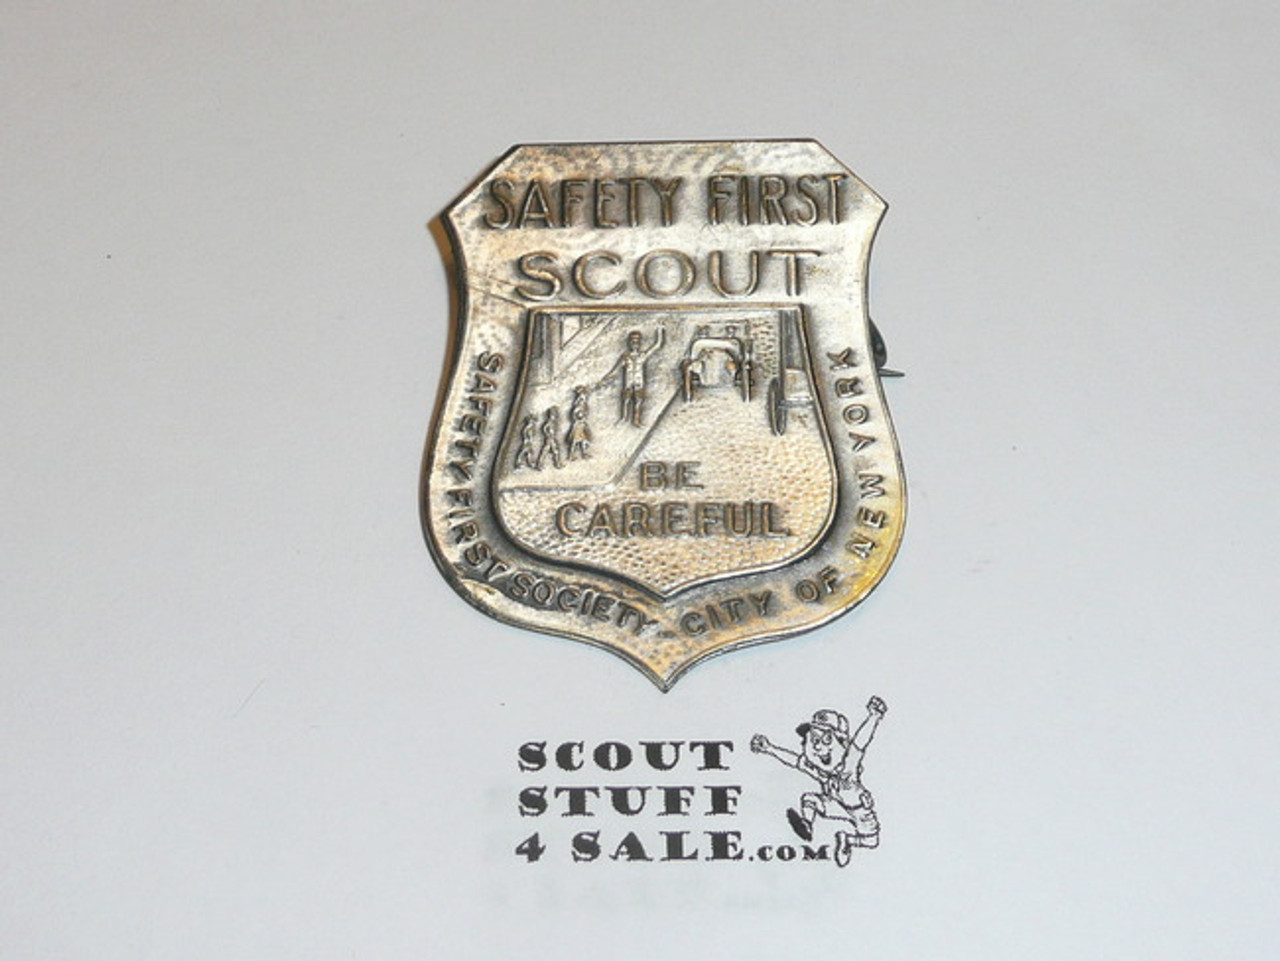 Safety First Scout Badge, Safety First Society New York City